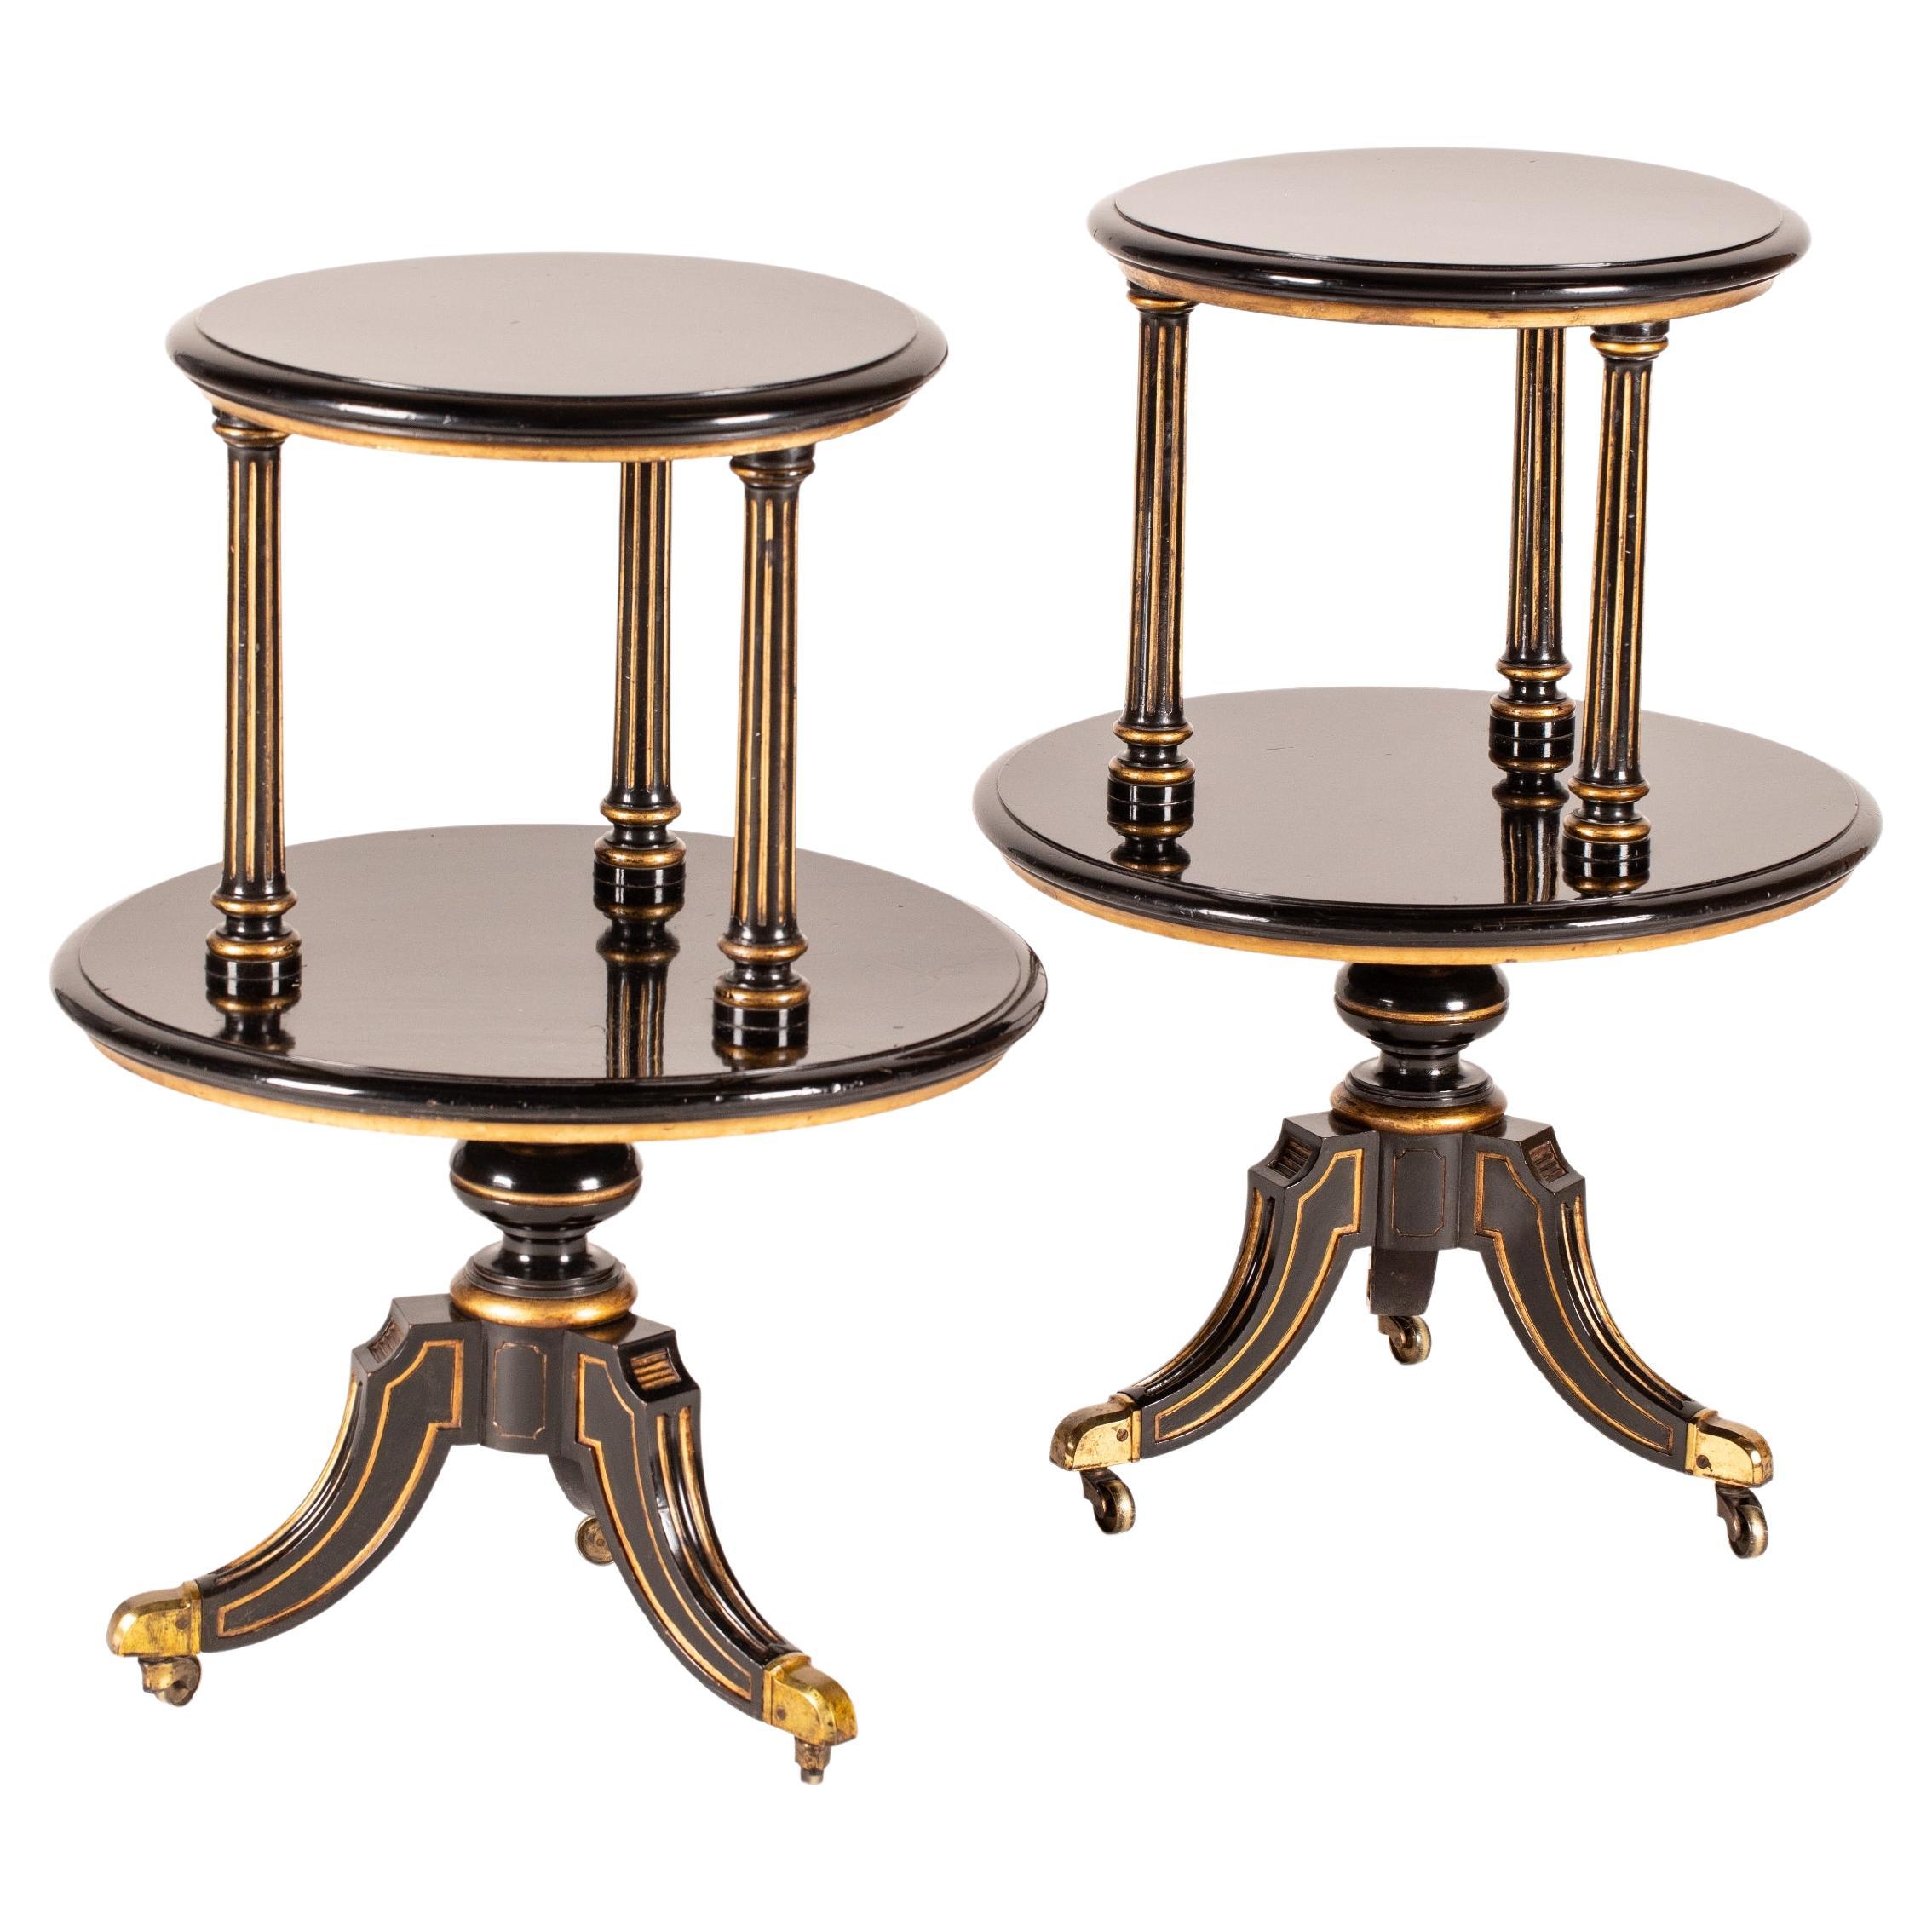 Rare 19th Century Pair of Black Lacquered Aesthetic Movement Étagère Tables For Sale